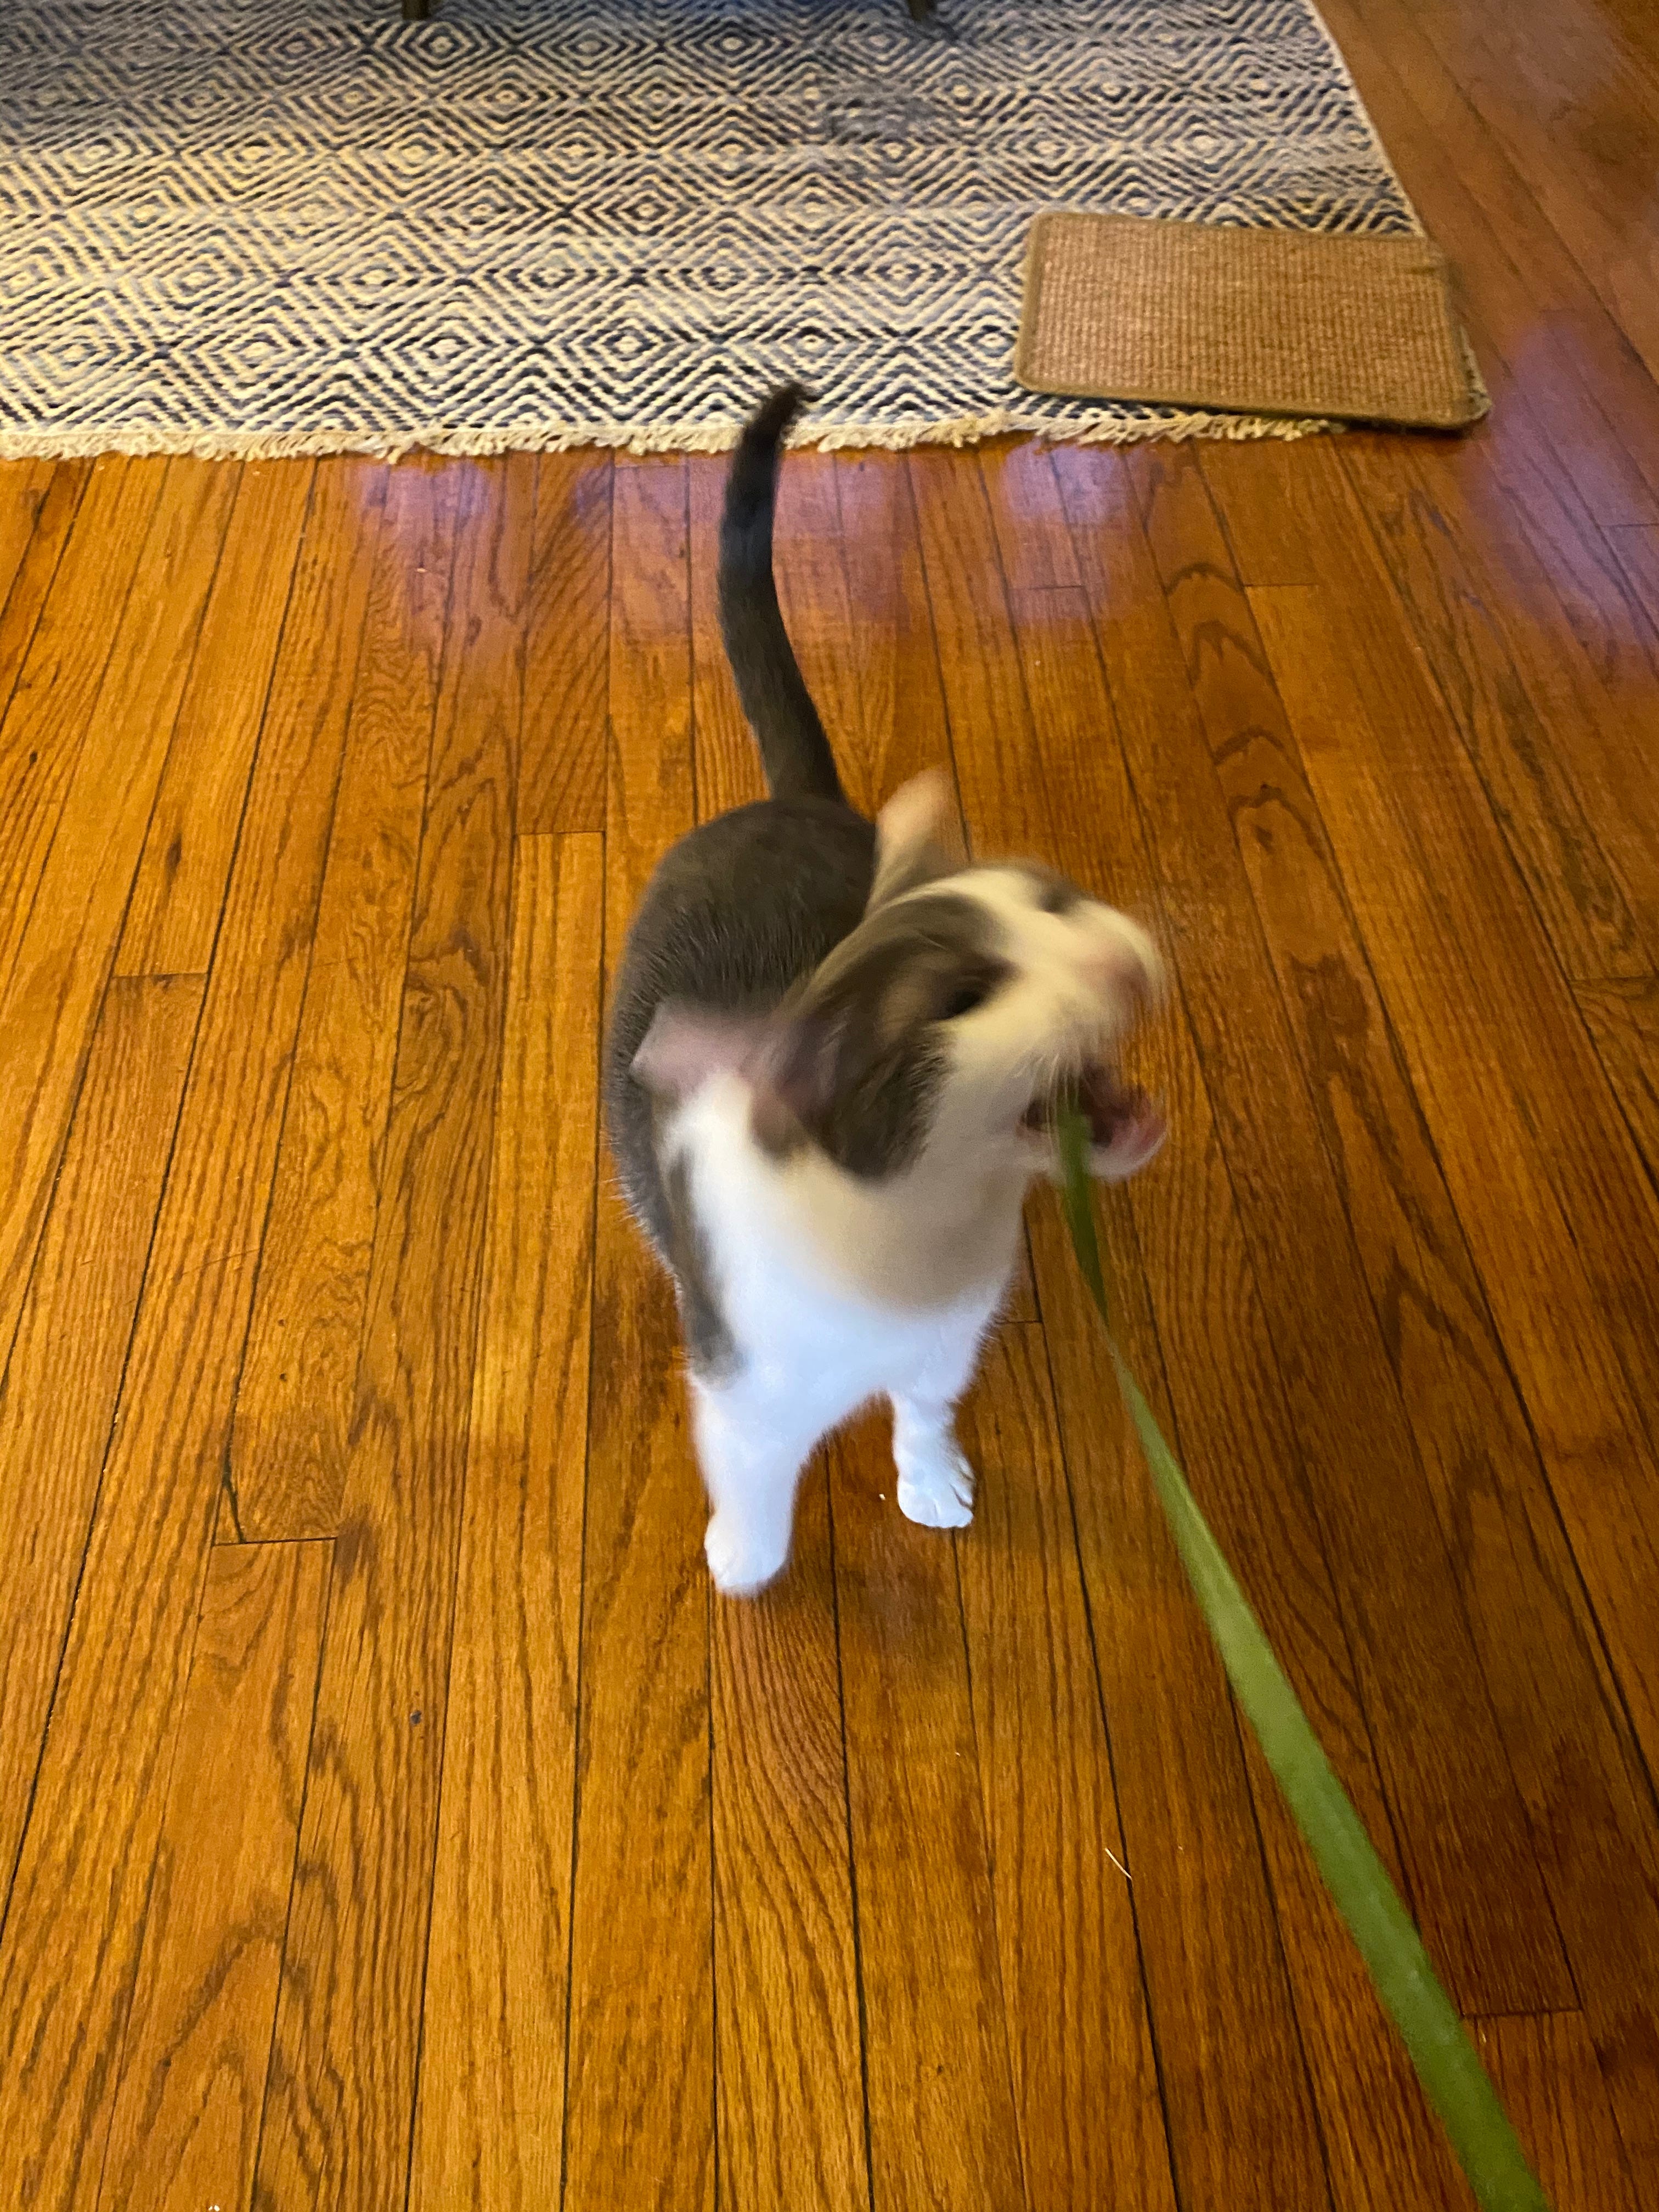 A small cat is captured mid-attack on a long fern leaf.